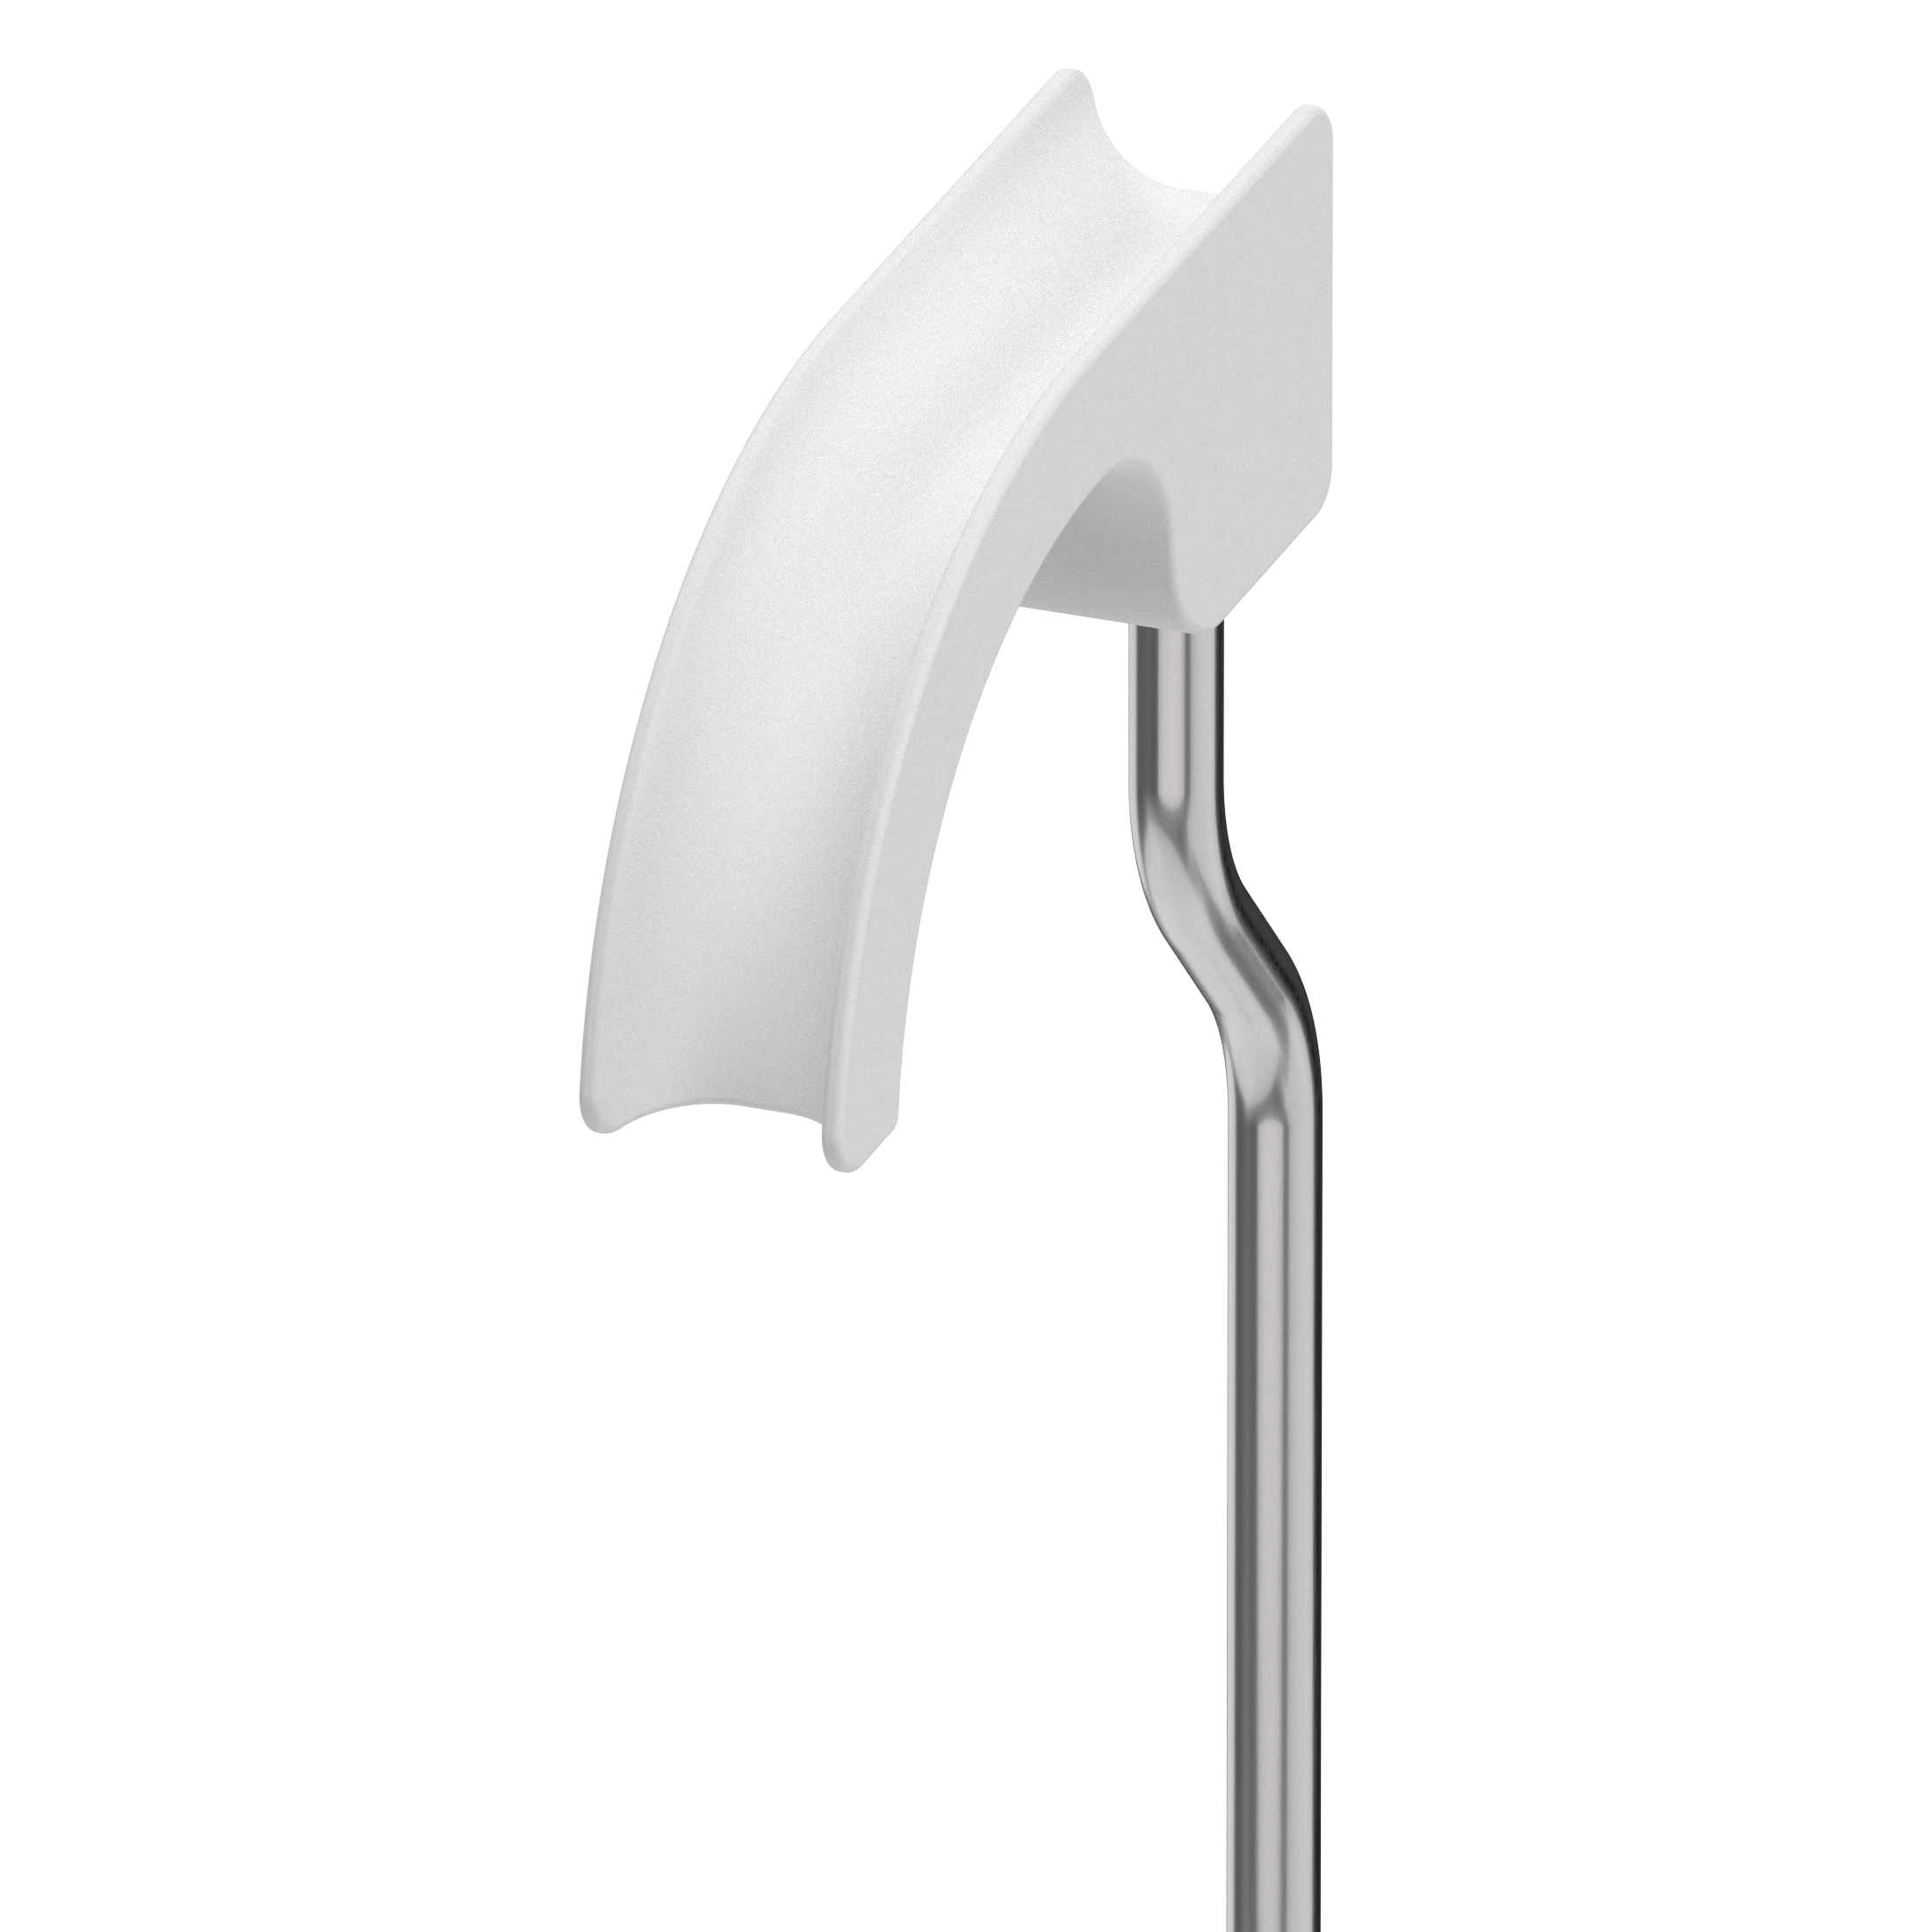 Endoscope handle support for Simple-Fix